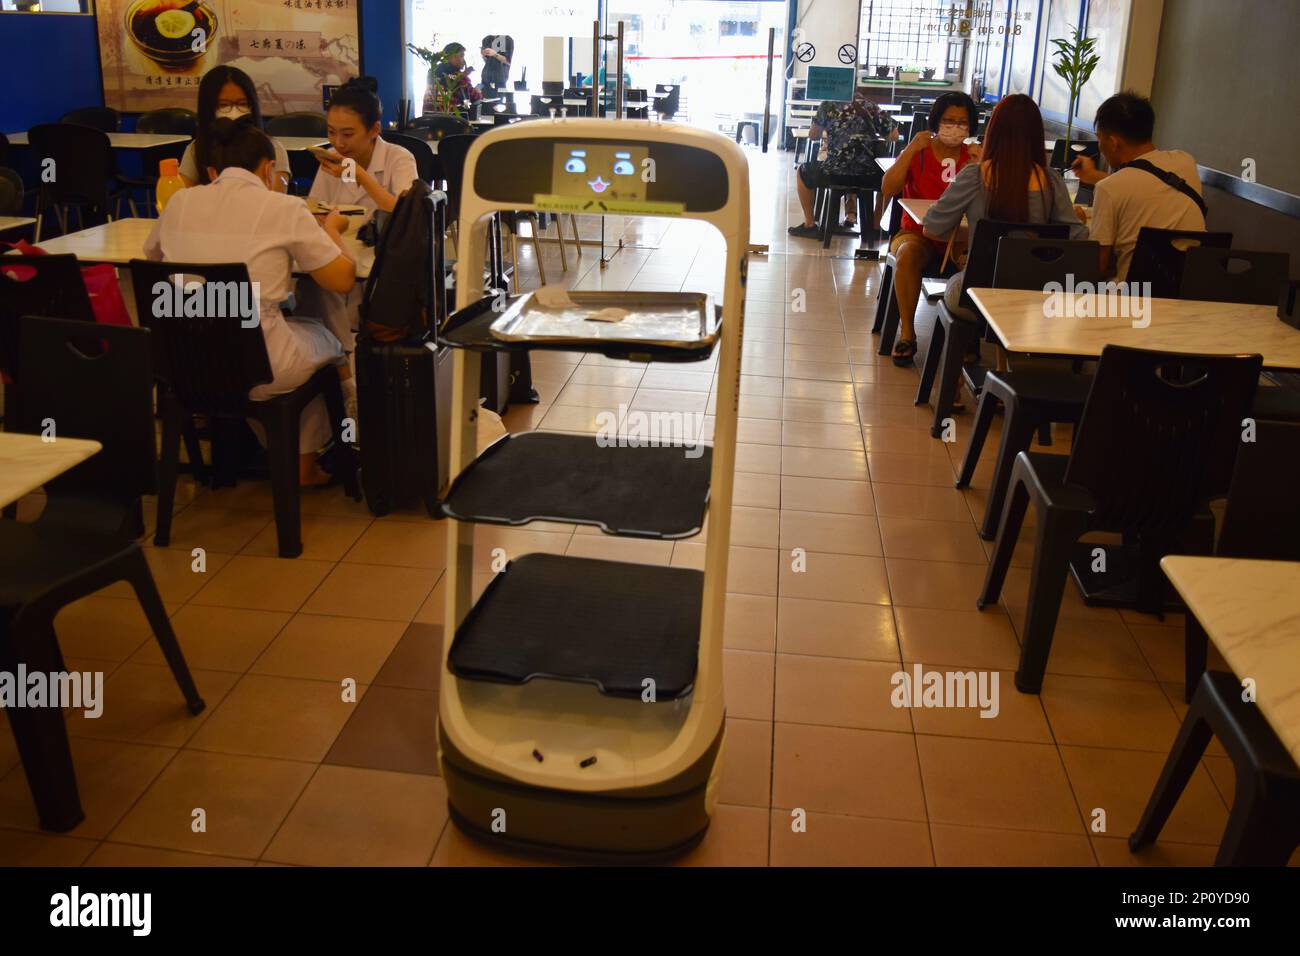 Robot waiter is serving food in a cafe in Malaysia. Stock Photo